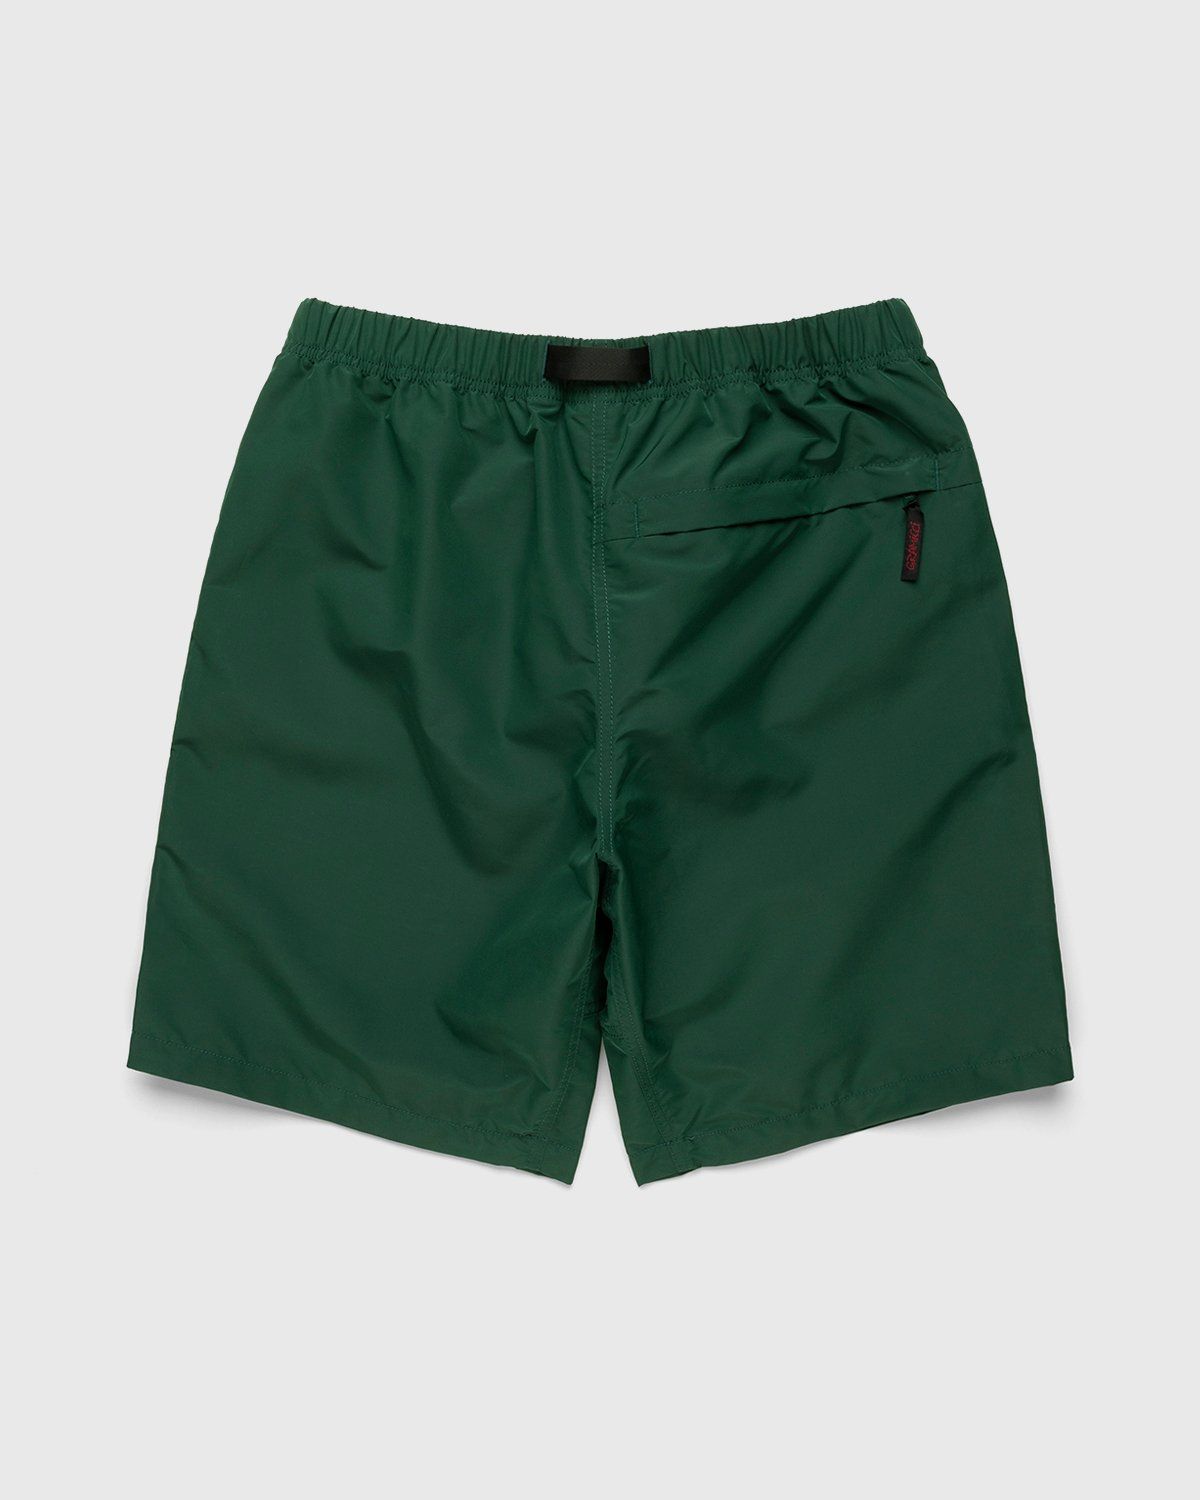 Gramicci x Highsnobiety – HS Sports Shell Packable Shorts Forest Green - Shorts - Green - Image 2